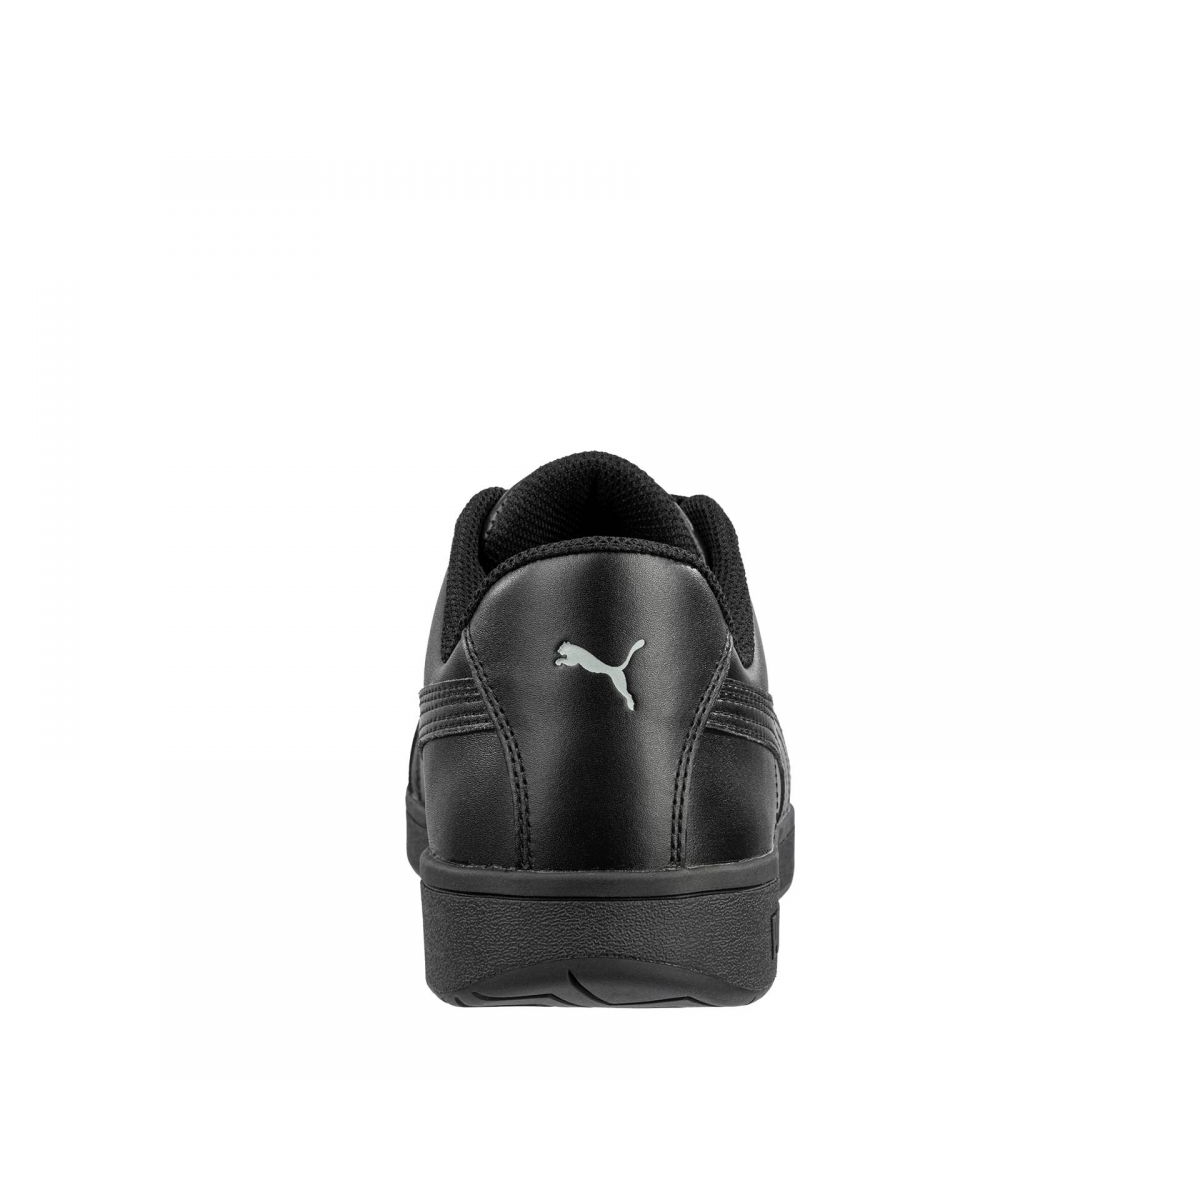 PUMA Safety Women's Iconic Low Composite Toe SD Work Shoes Smooth Black Leather - 640105 BLACK - BLACK, 9